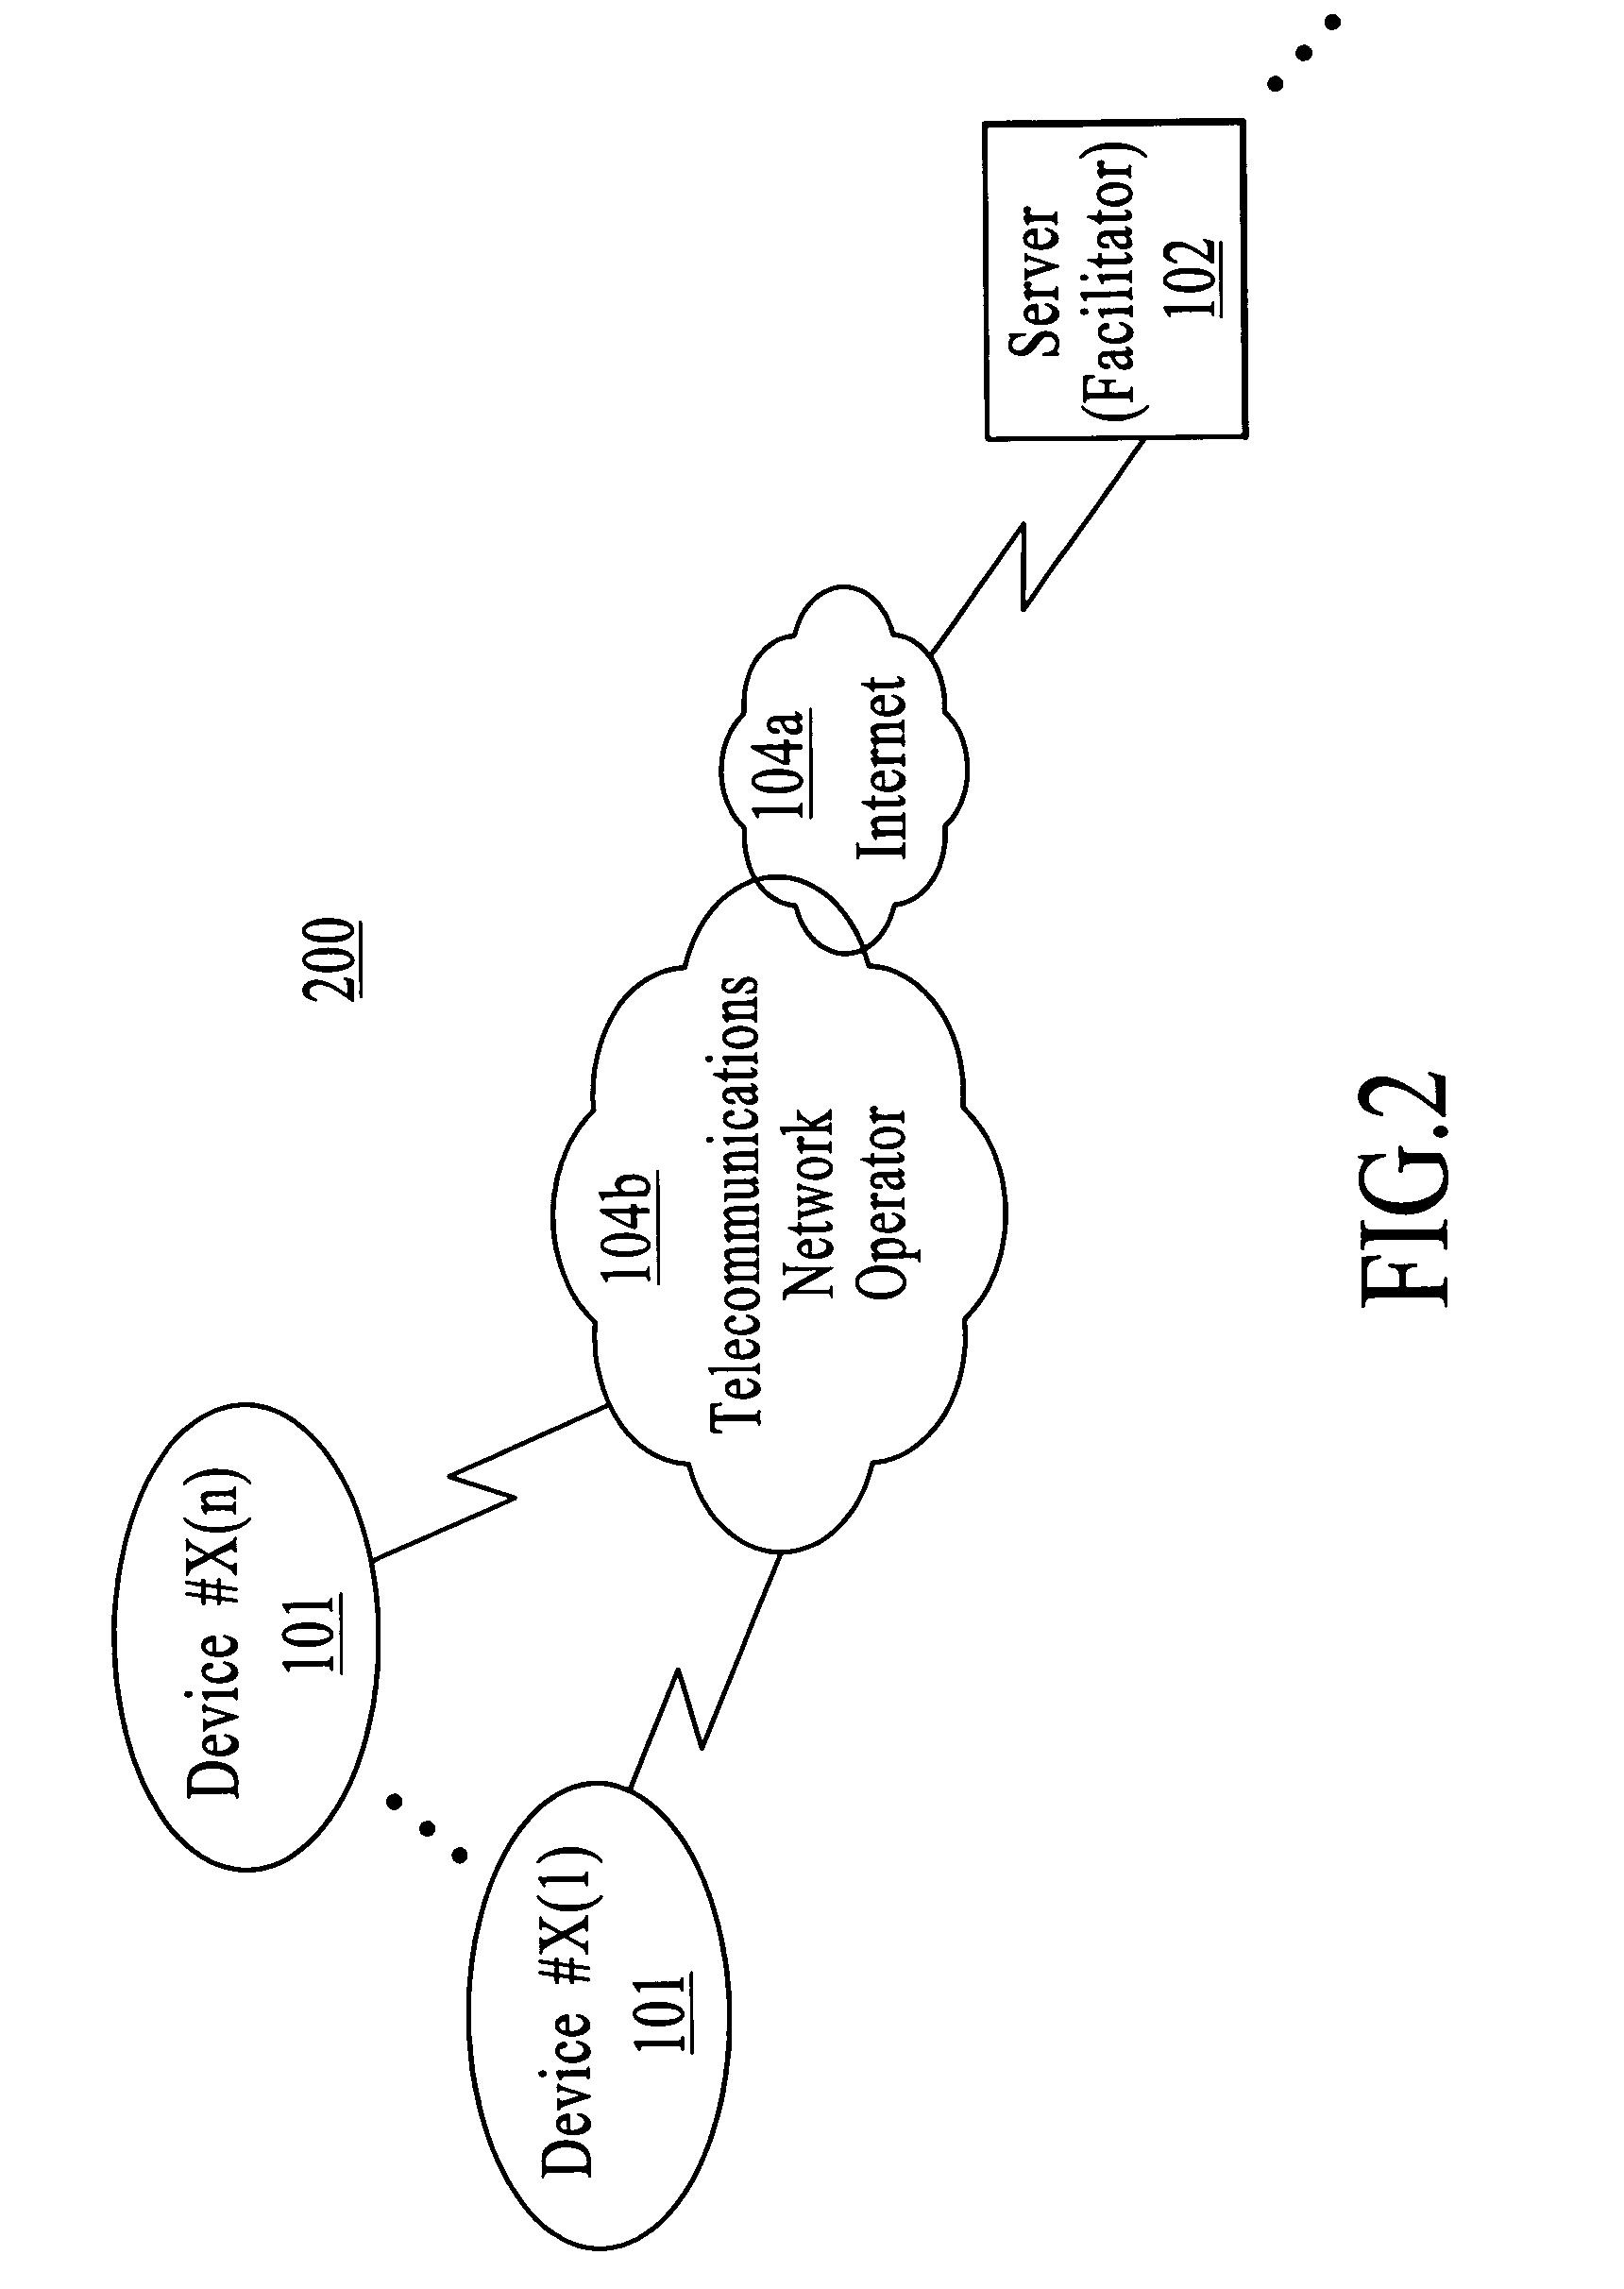 System and method for active mobile collaboration